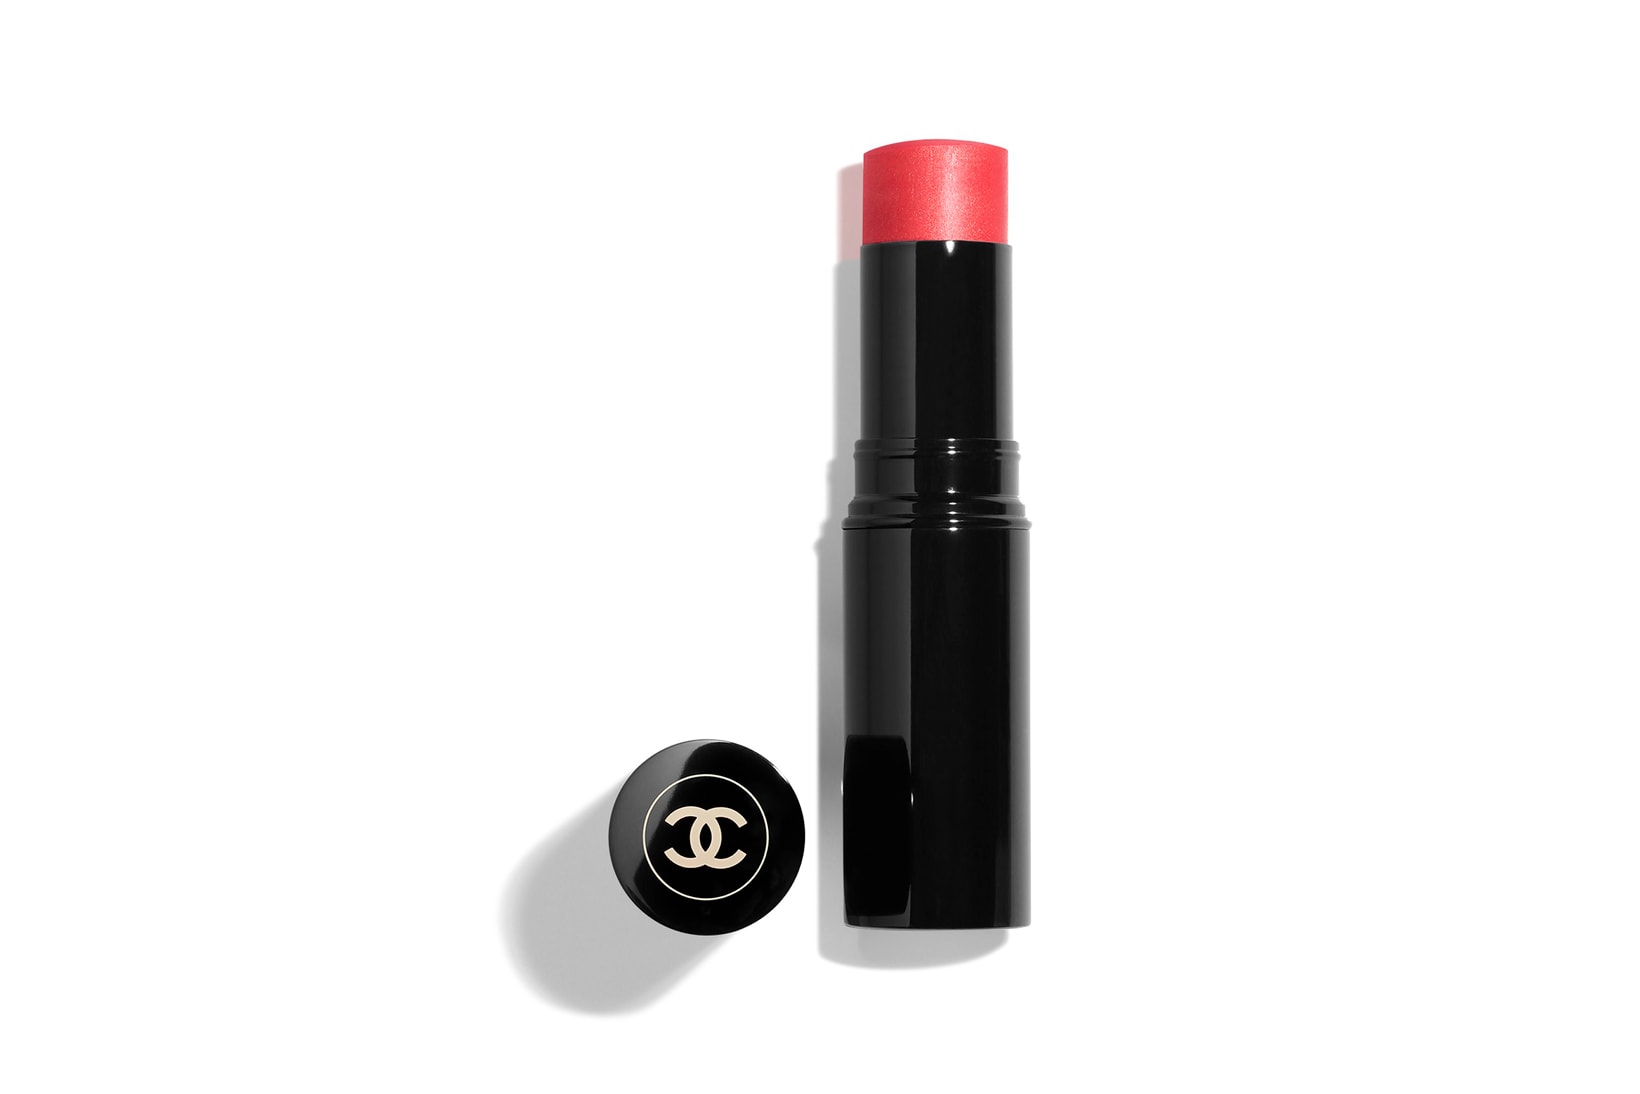 Chanel Beauty LES BEIGES Healthy Glow Sheer Colour Stick Number 25